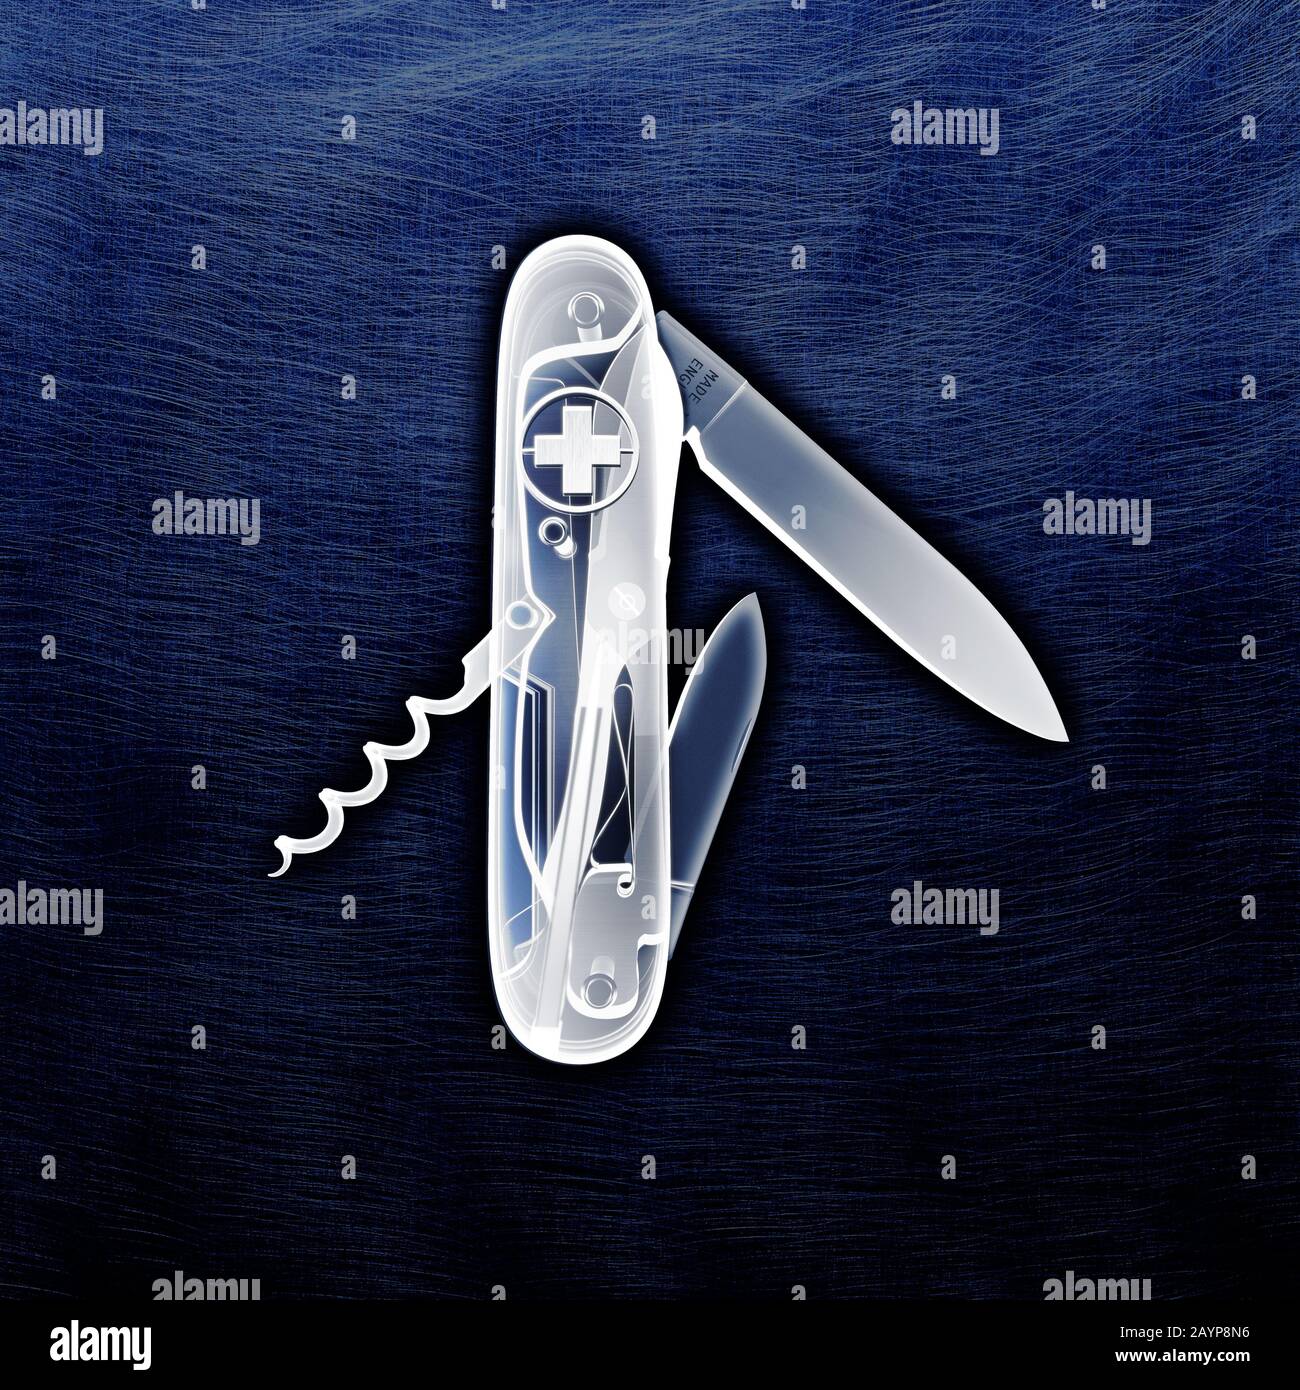 X ray X-ray Swiss army knife. Penknife with knives and corkscrew with its working revealed on a blue metal background. Stock Photo